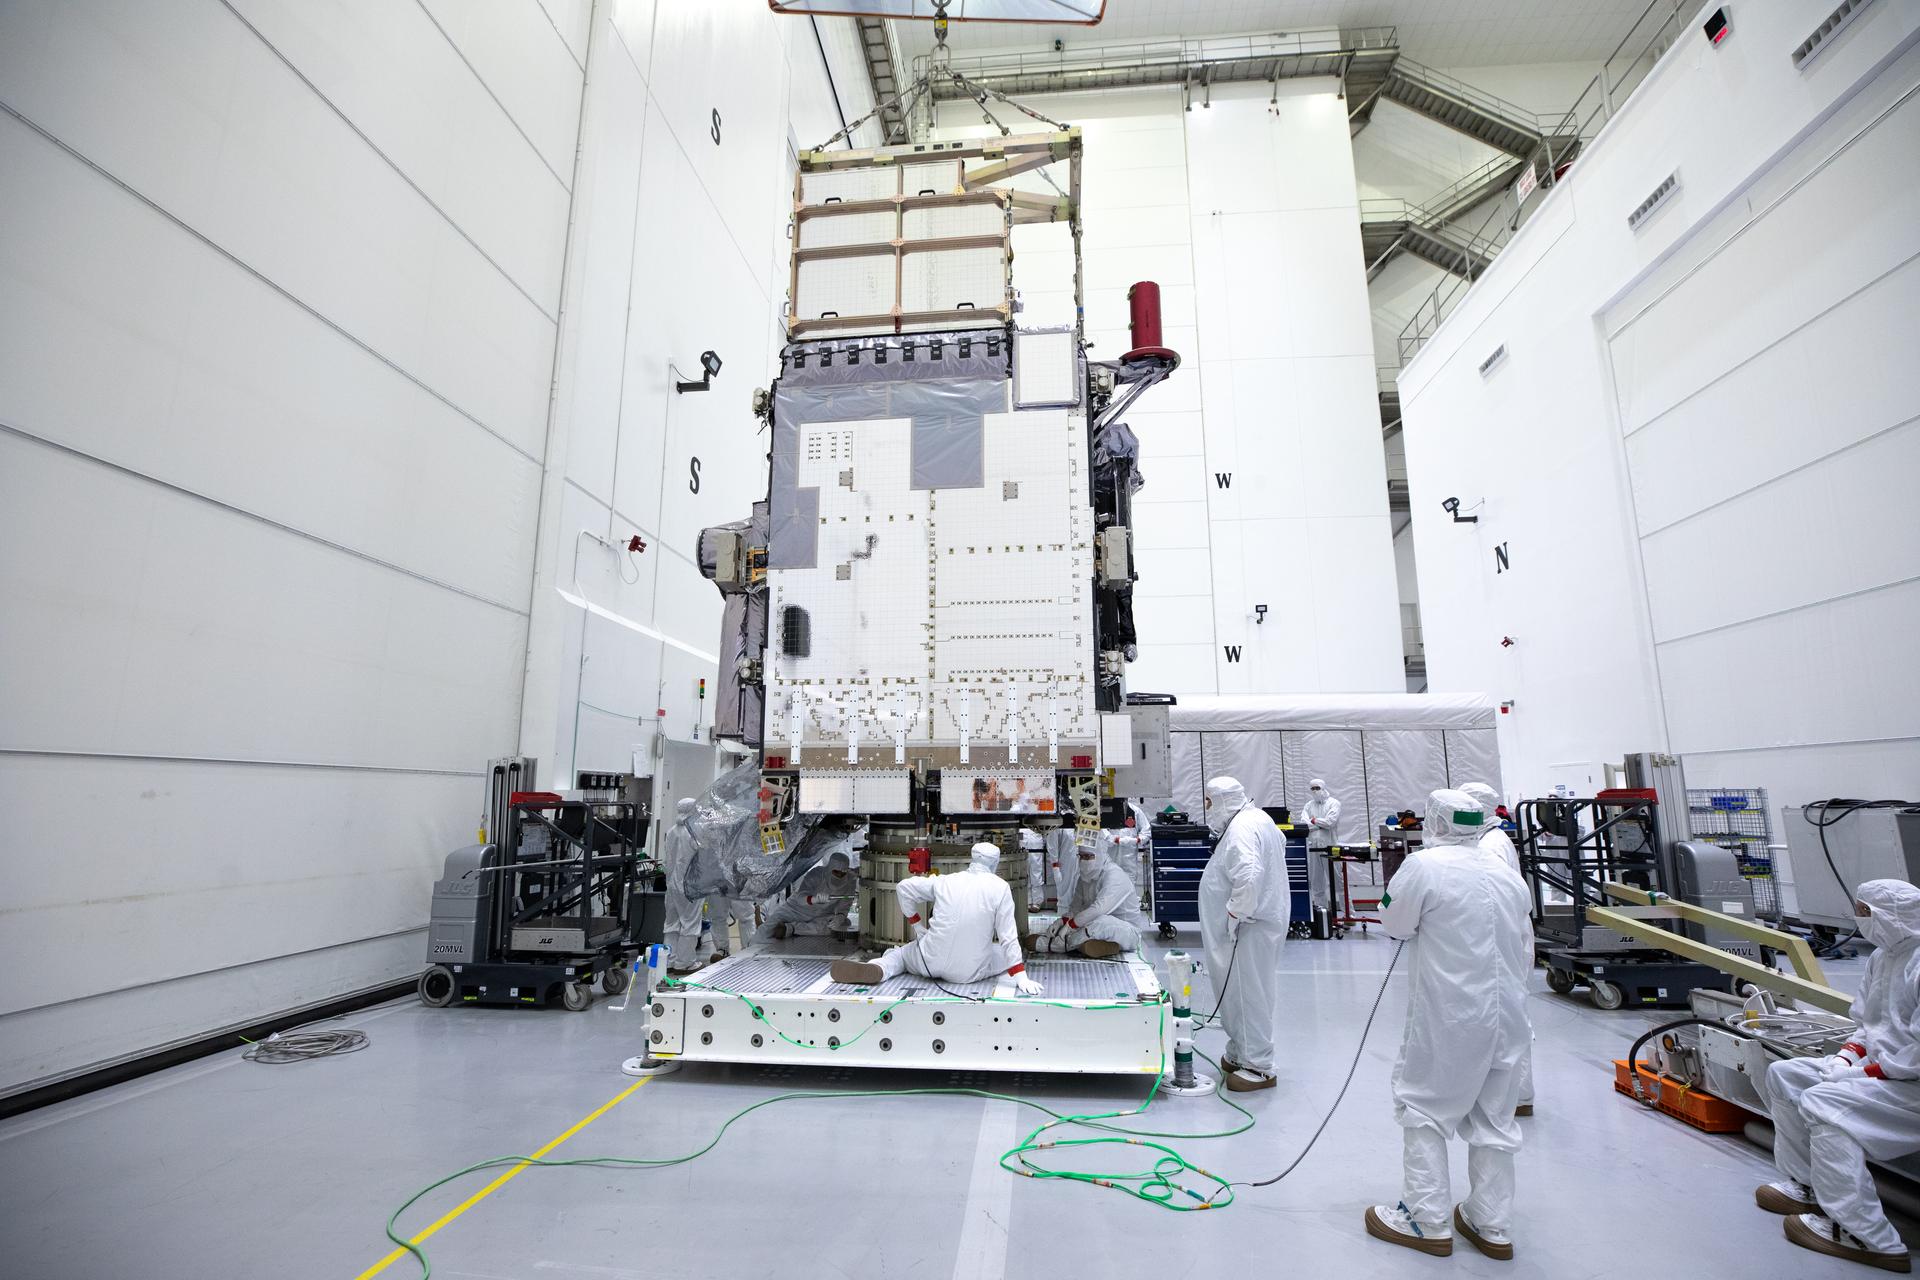 Technicians monitor movement and guide NOAA's Geostationary Operation Environmental Satellite-U (GOES-U) as a crane hoists it on to a spacecraft dolly in a high bay at the Astrotech Space Operations Facility near the agency's Kennedy Space Center in Florida.